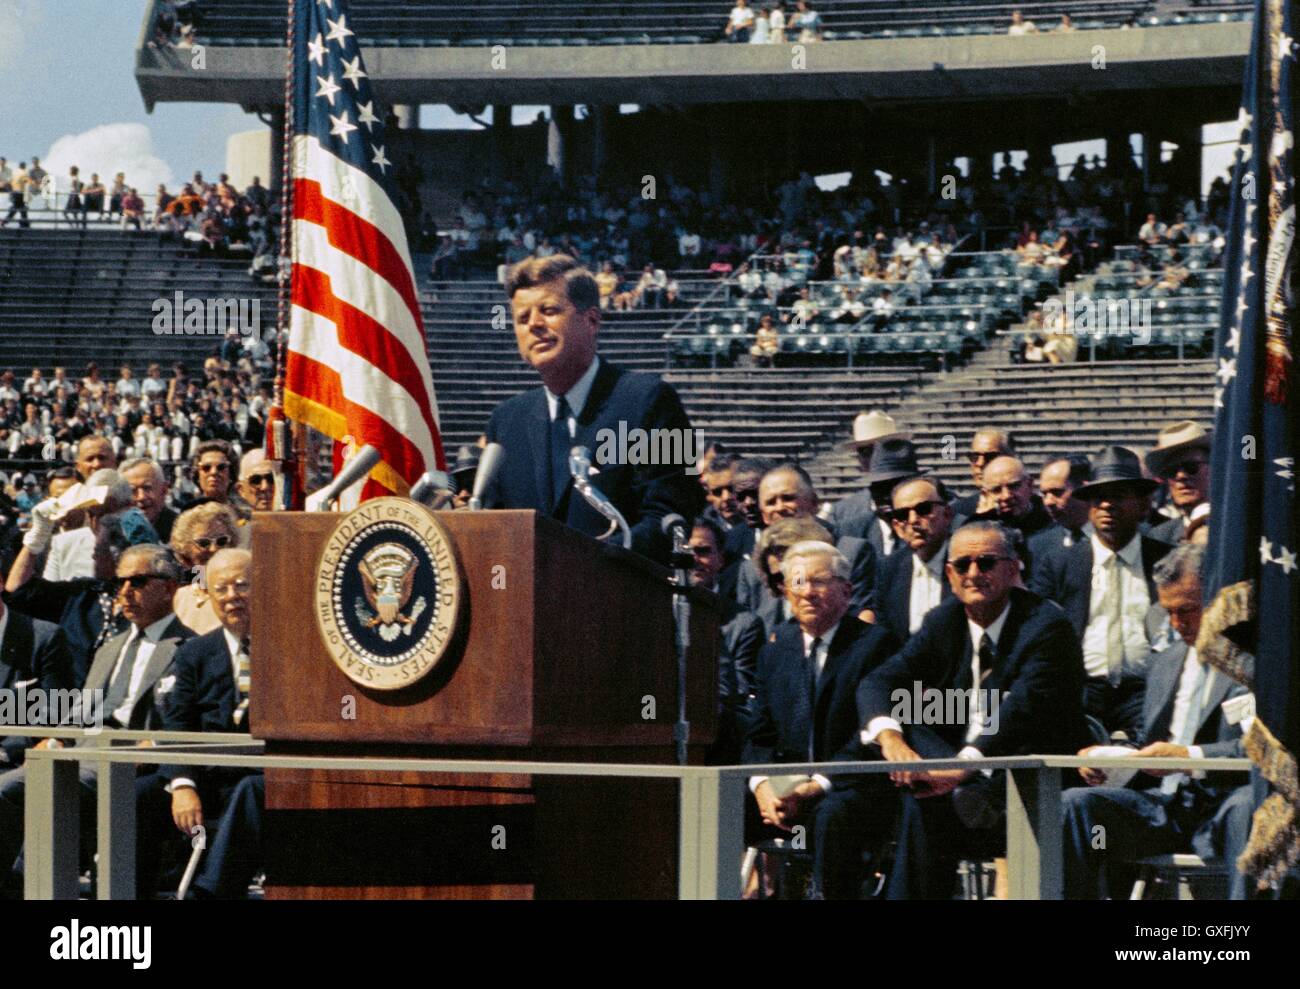 U.S. President John F. Kennedy delivers his famous speech on space exploration and the nations effort to land on the Moon during an address at the Rice University Stadium September 12, 1962 in Houston, Texas. Stock Photo